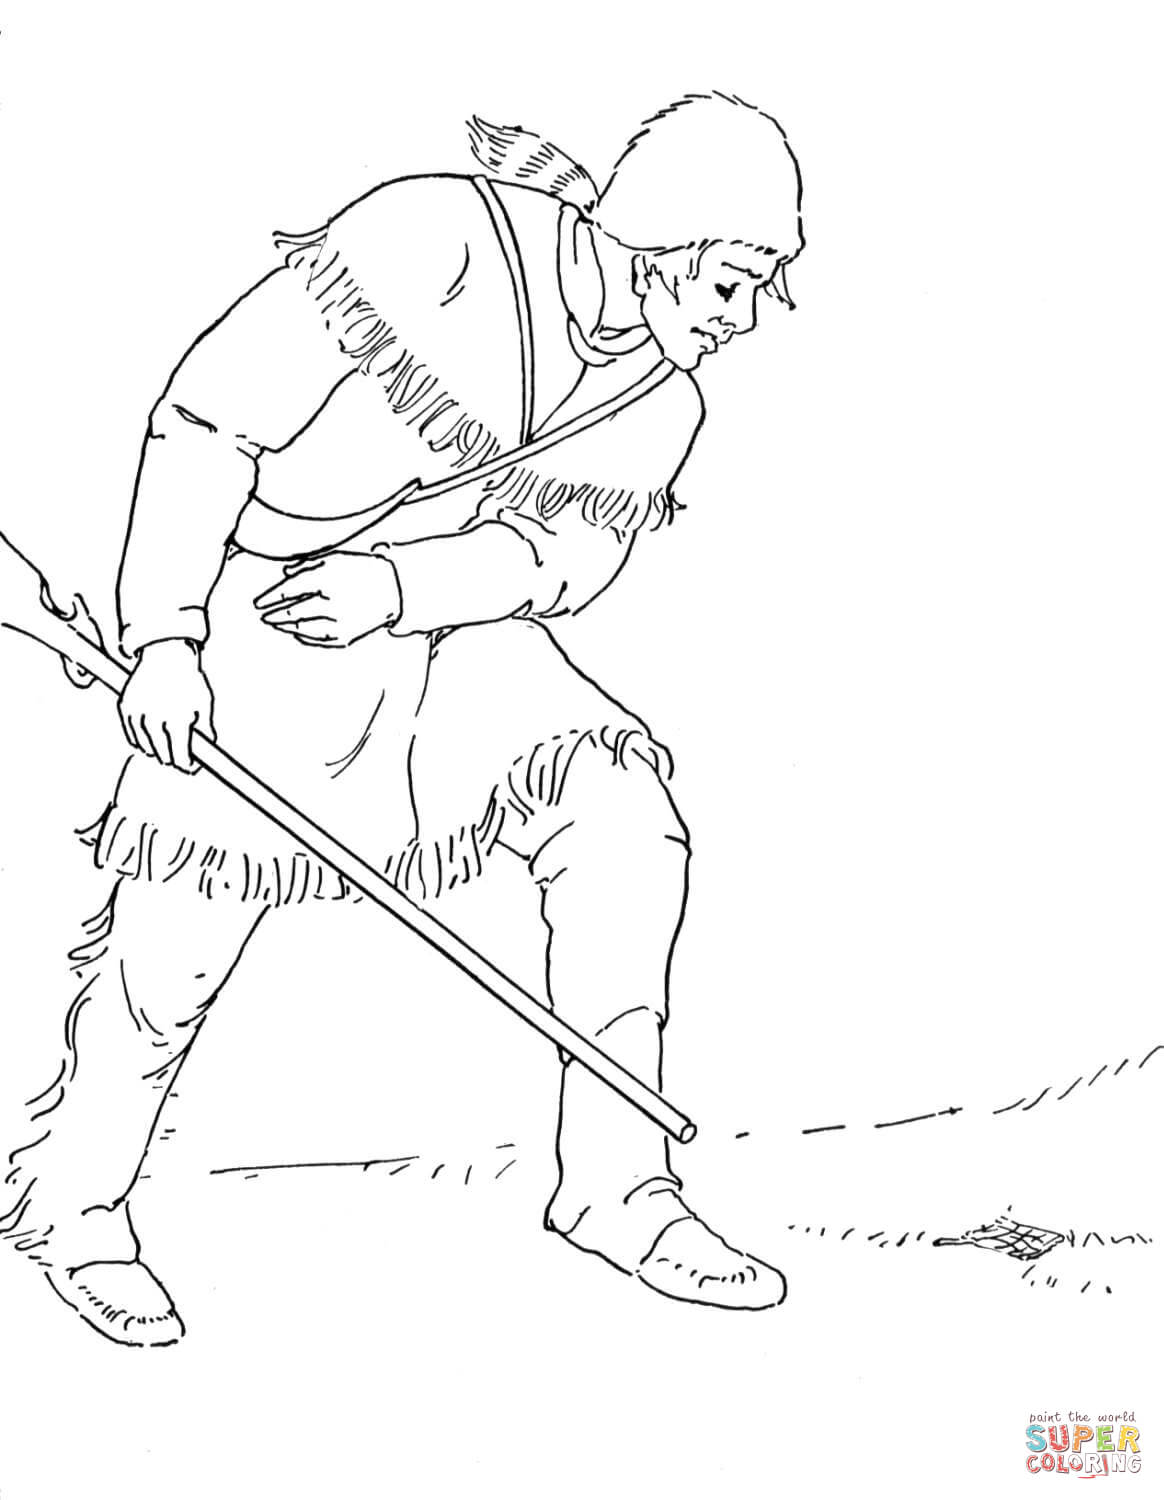 Johnny Appleseed coloring page | Free Printable Coloring Pages